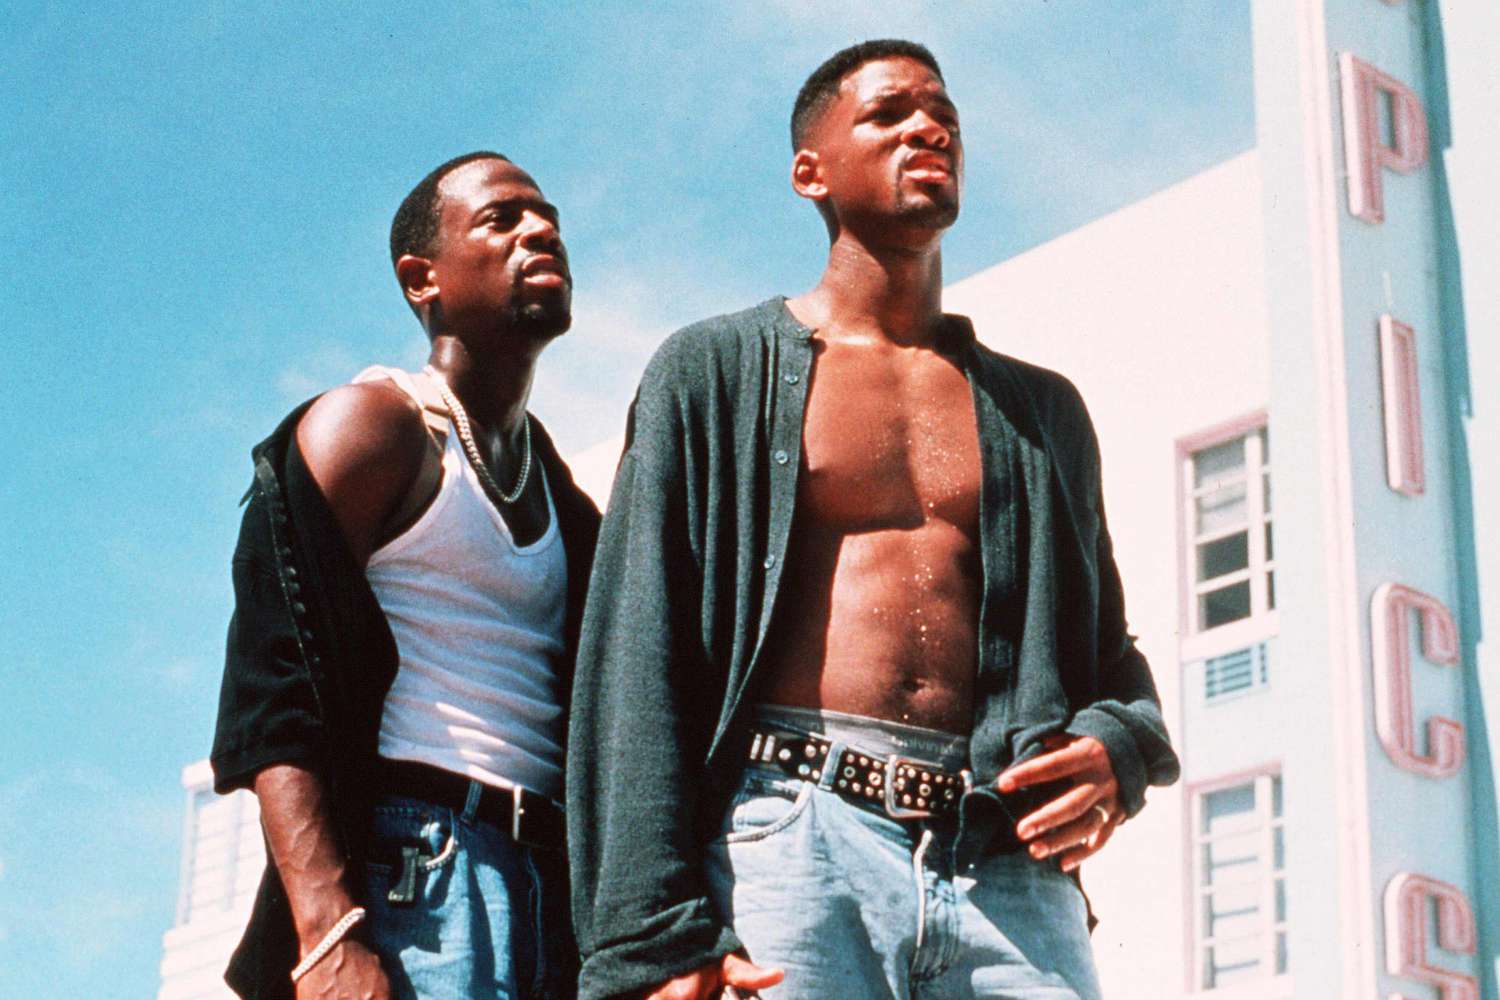 Despite rewatching Bad Boys multiple times, it's always amazing to watch it all over again and again with full of its action tropes.